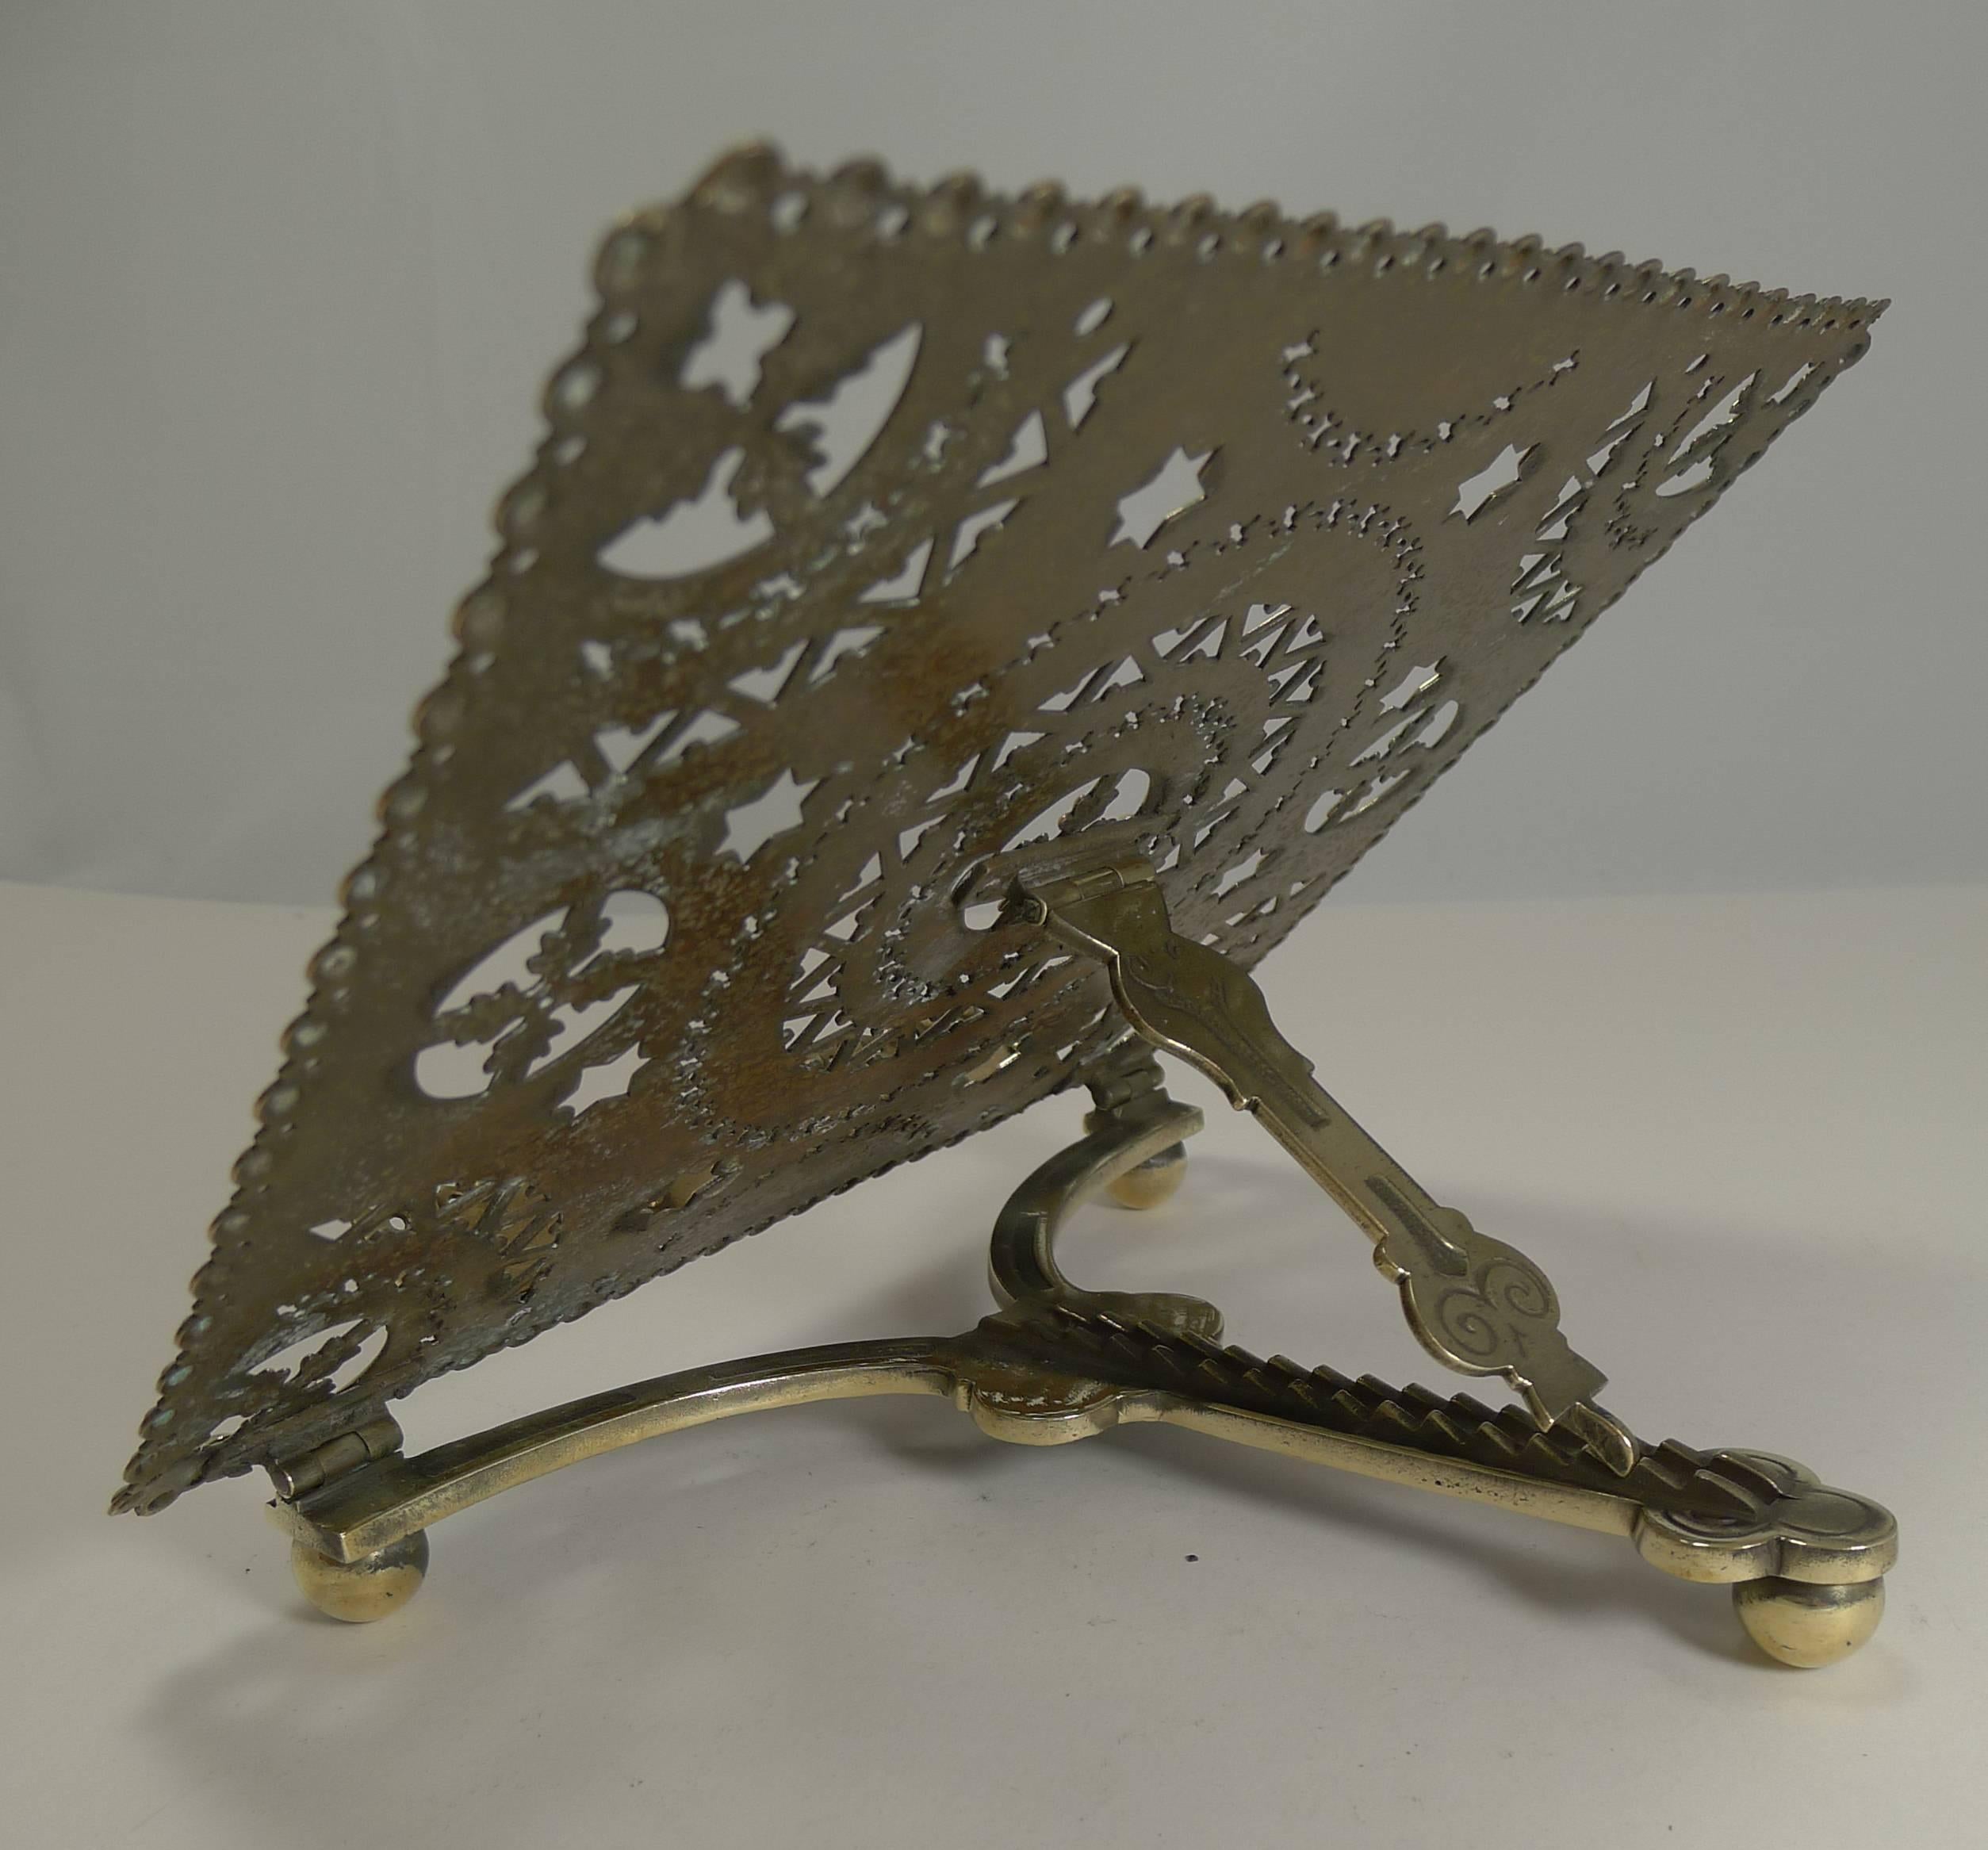 Brass Antique English Pieced or Reticulated Lectern / Book Rest, circa 1880